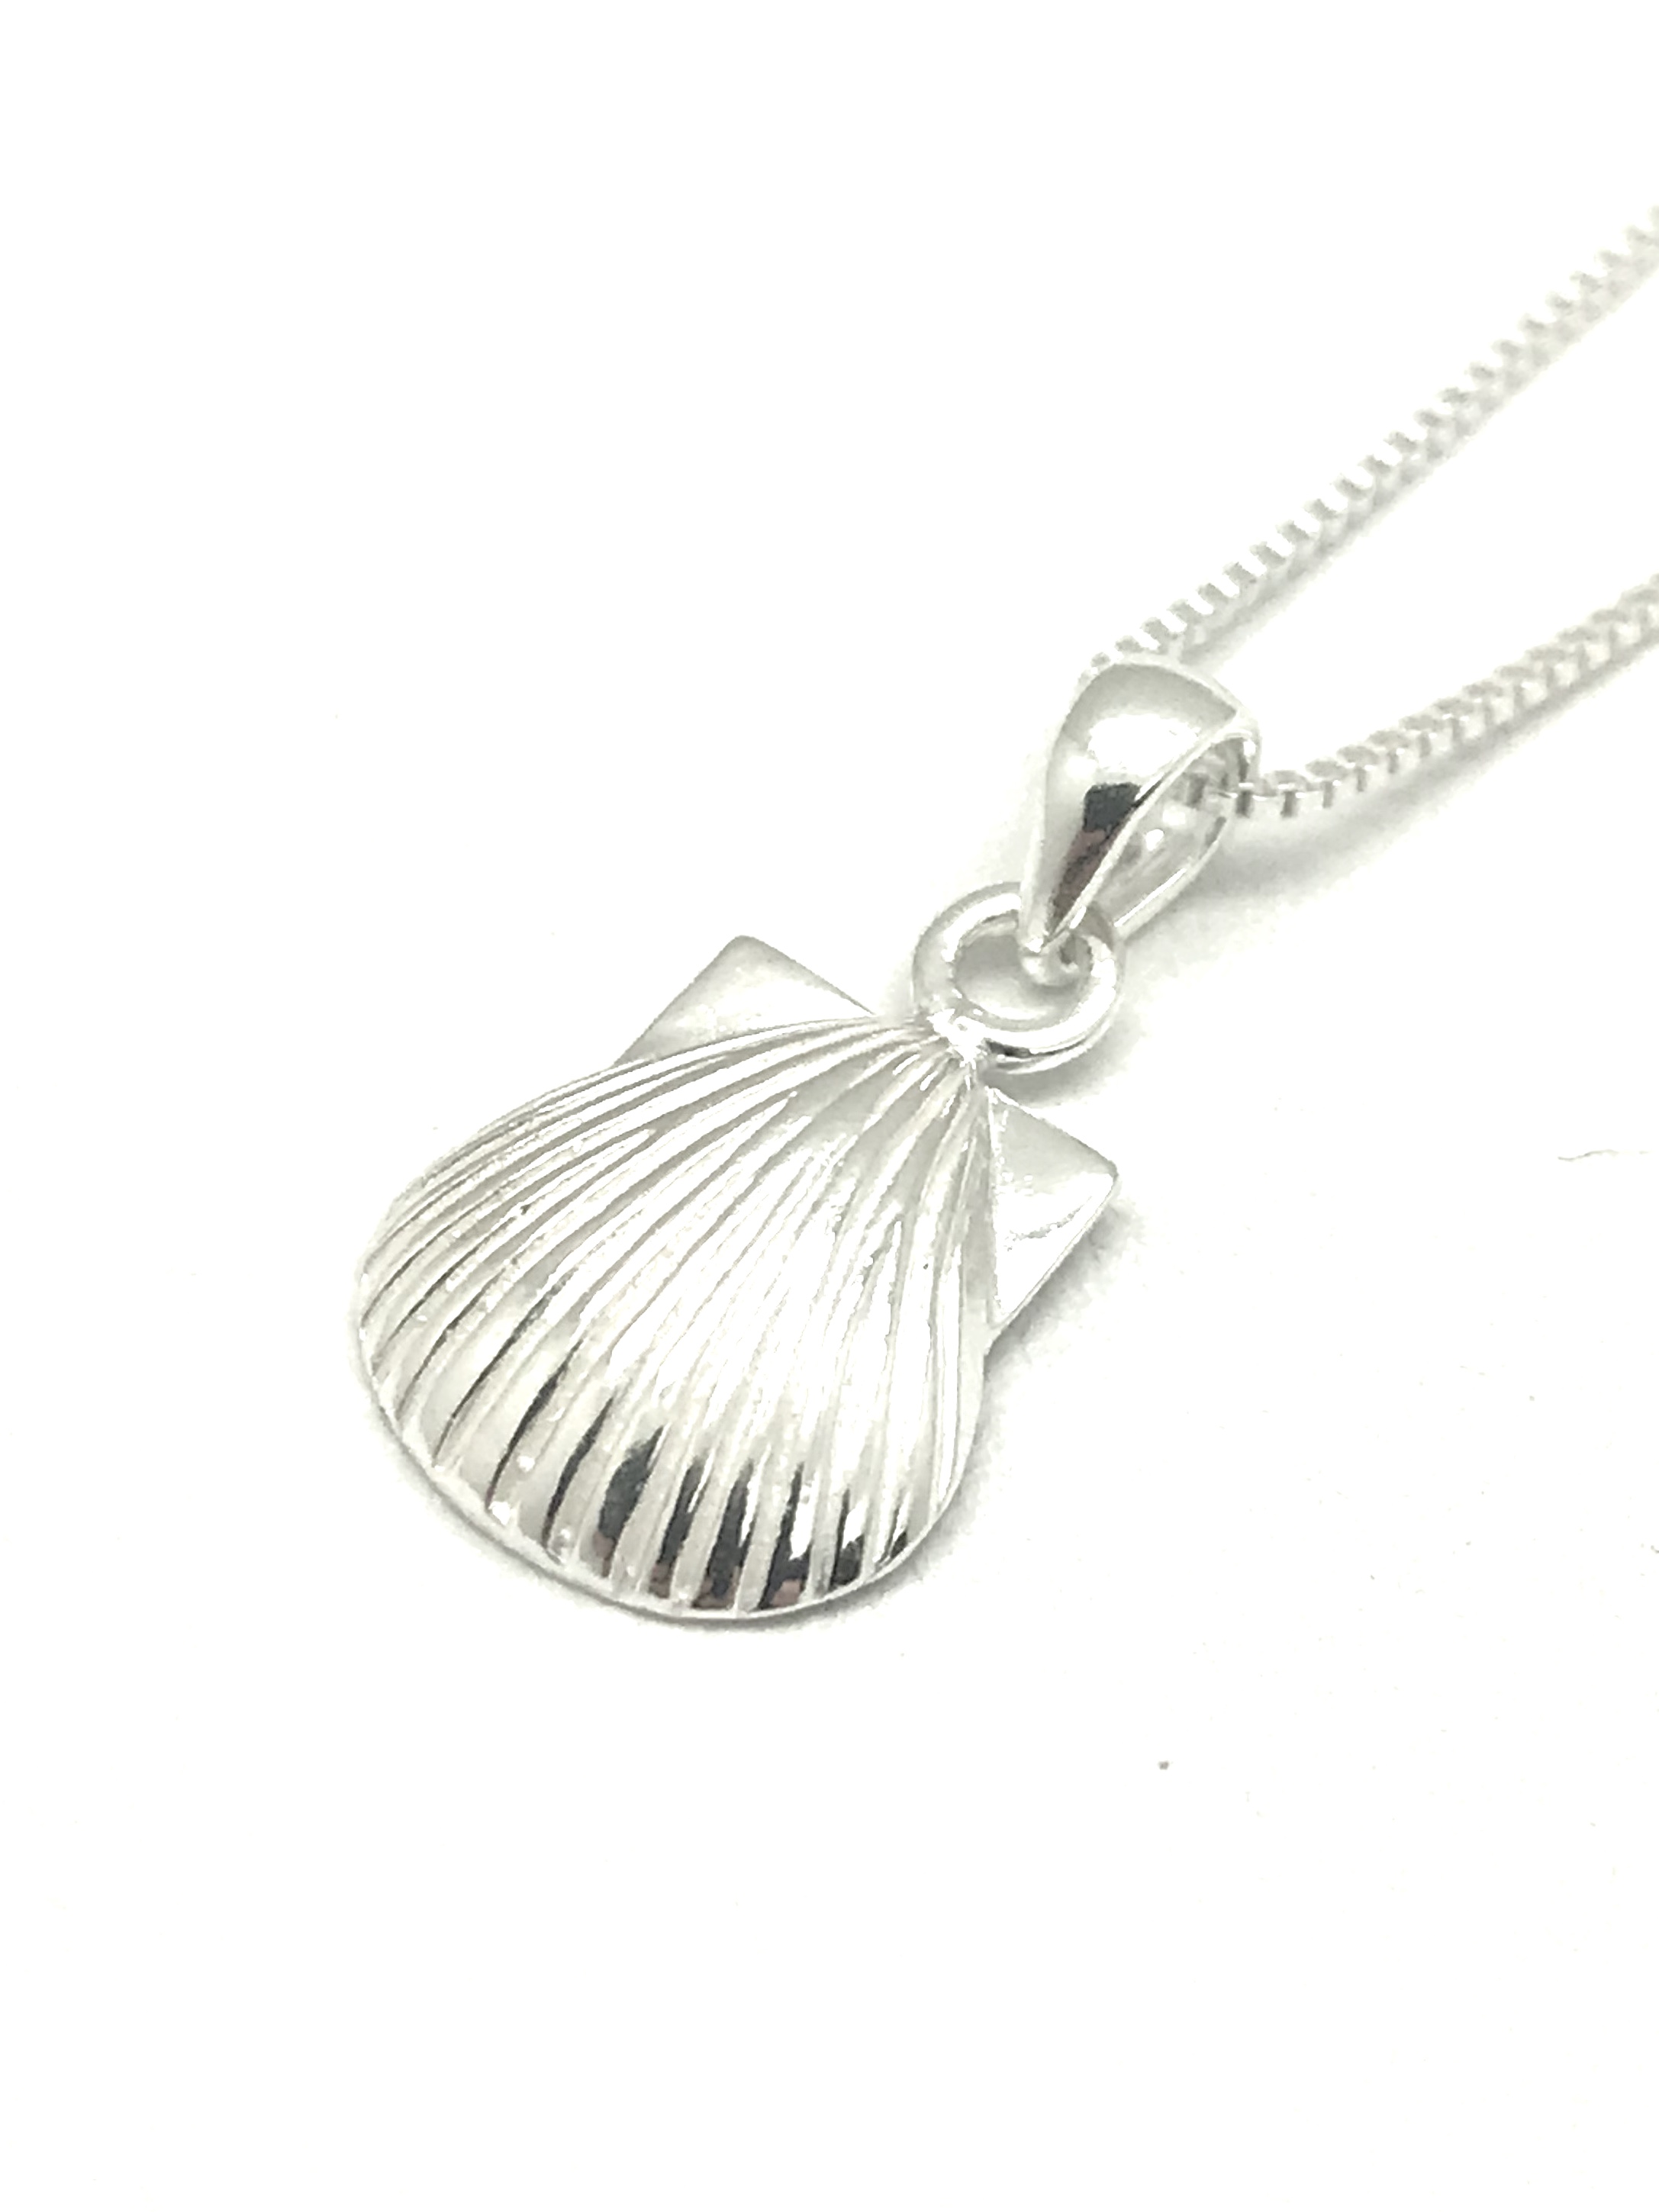 mermaid necklace Little silver scallop shell necklace sea shell